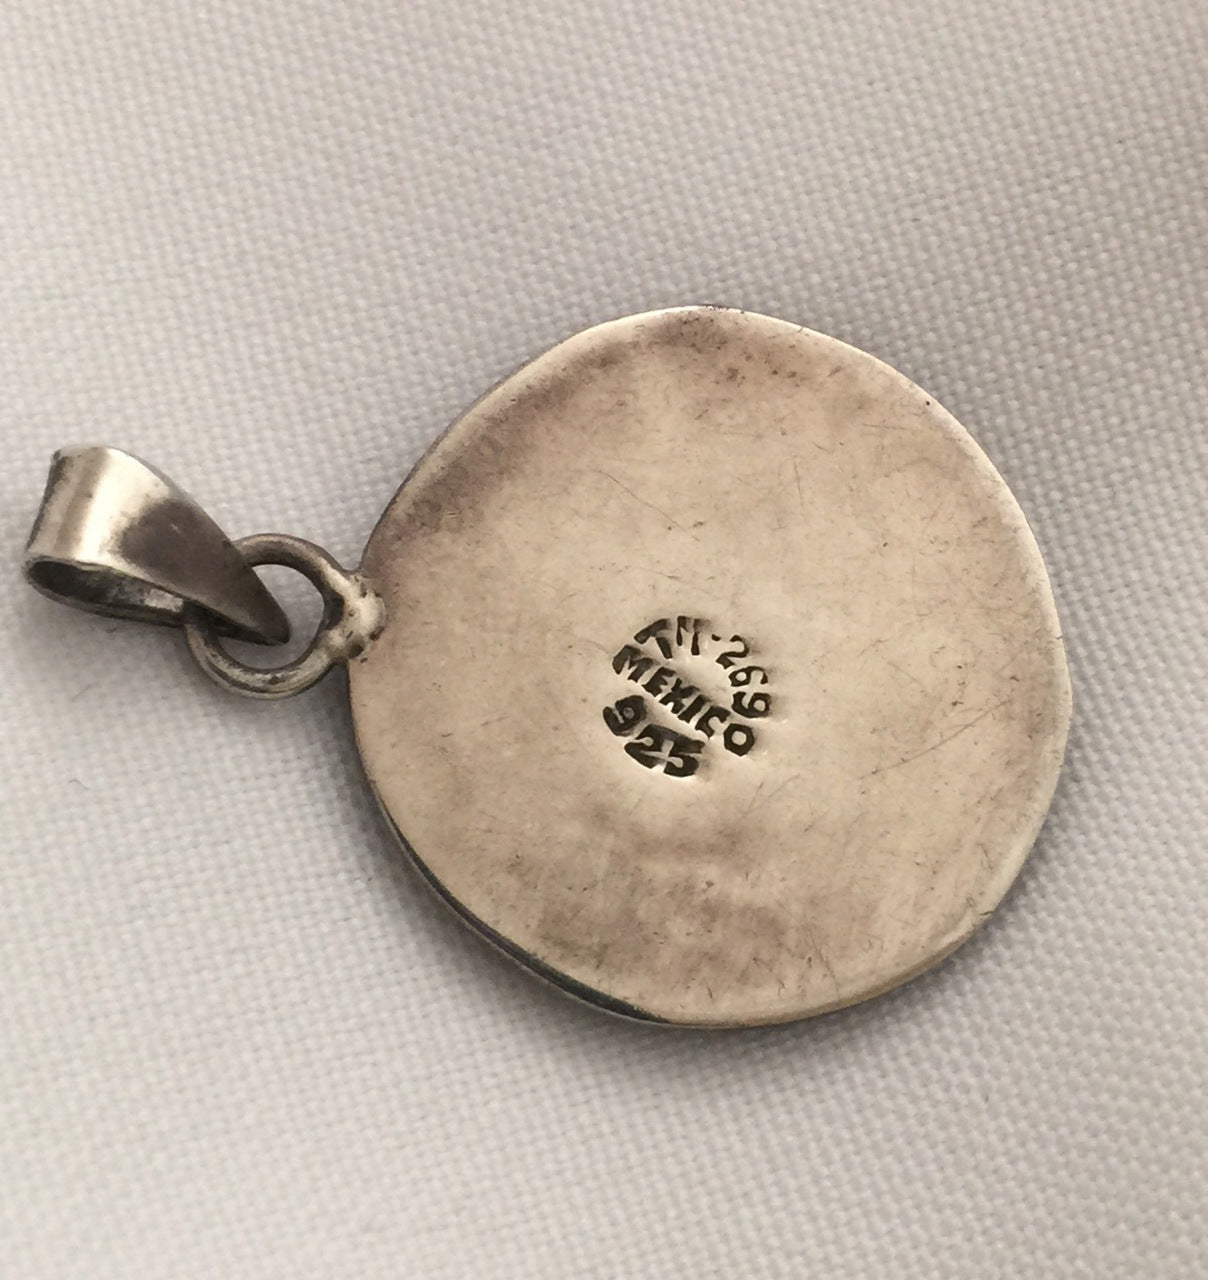 Mexican Aztec Day of the DeadVintage Sterling Silver Pendant